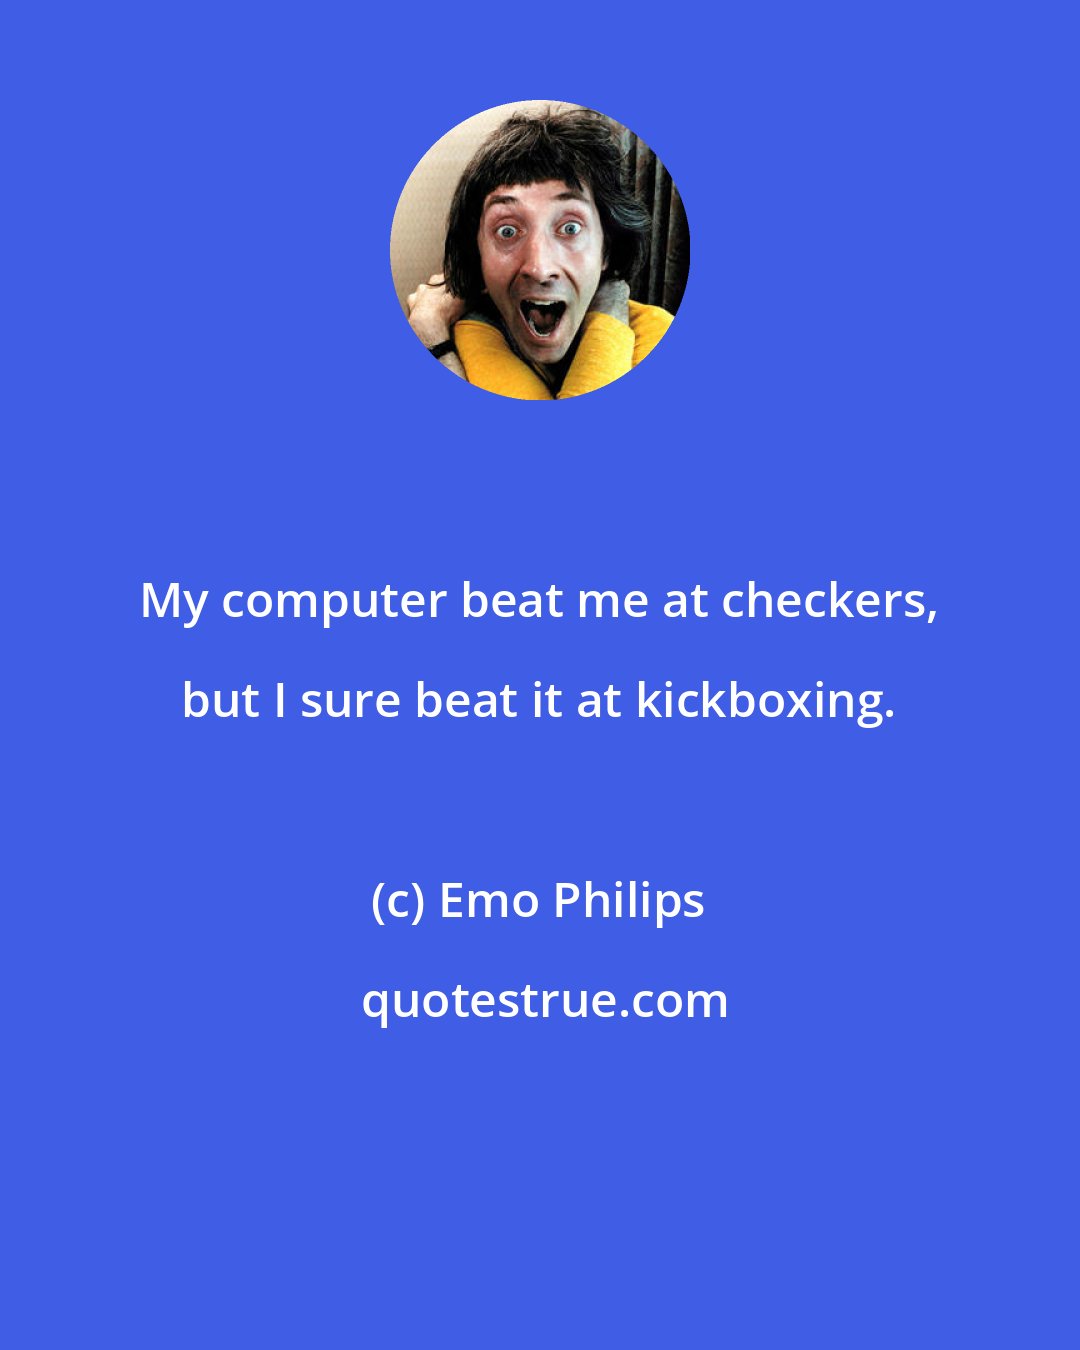 Emo Philips: My computer beat me at checkers, but I sure beat it at kickboxing.